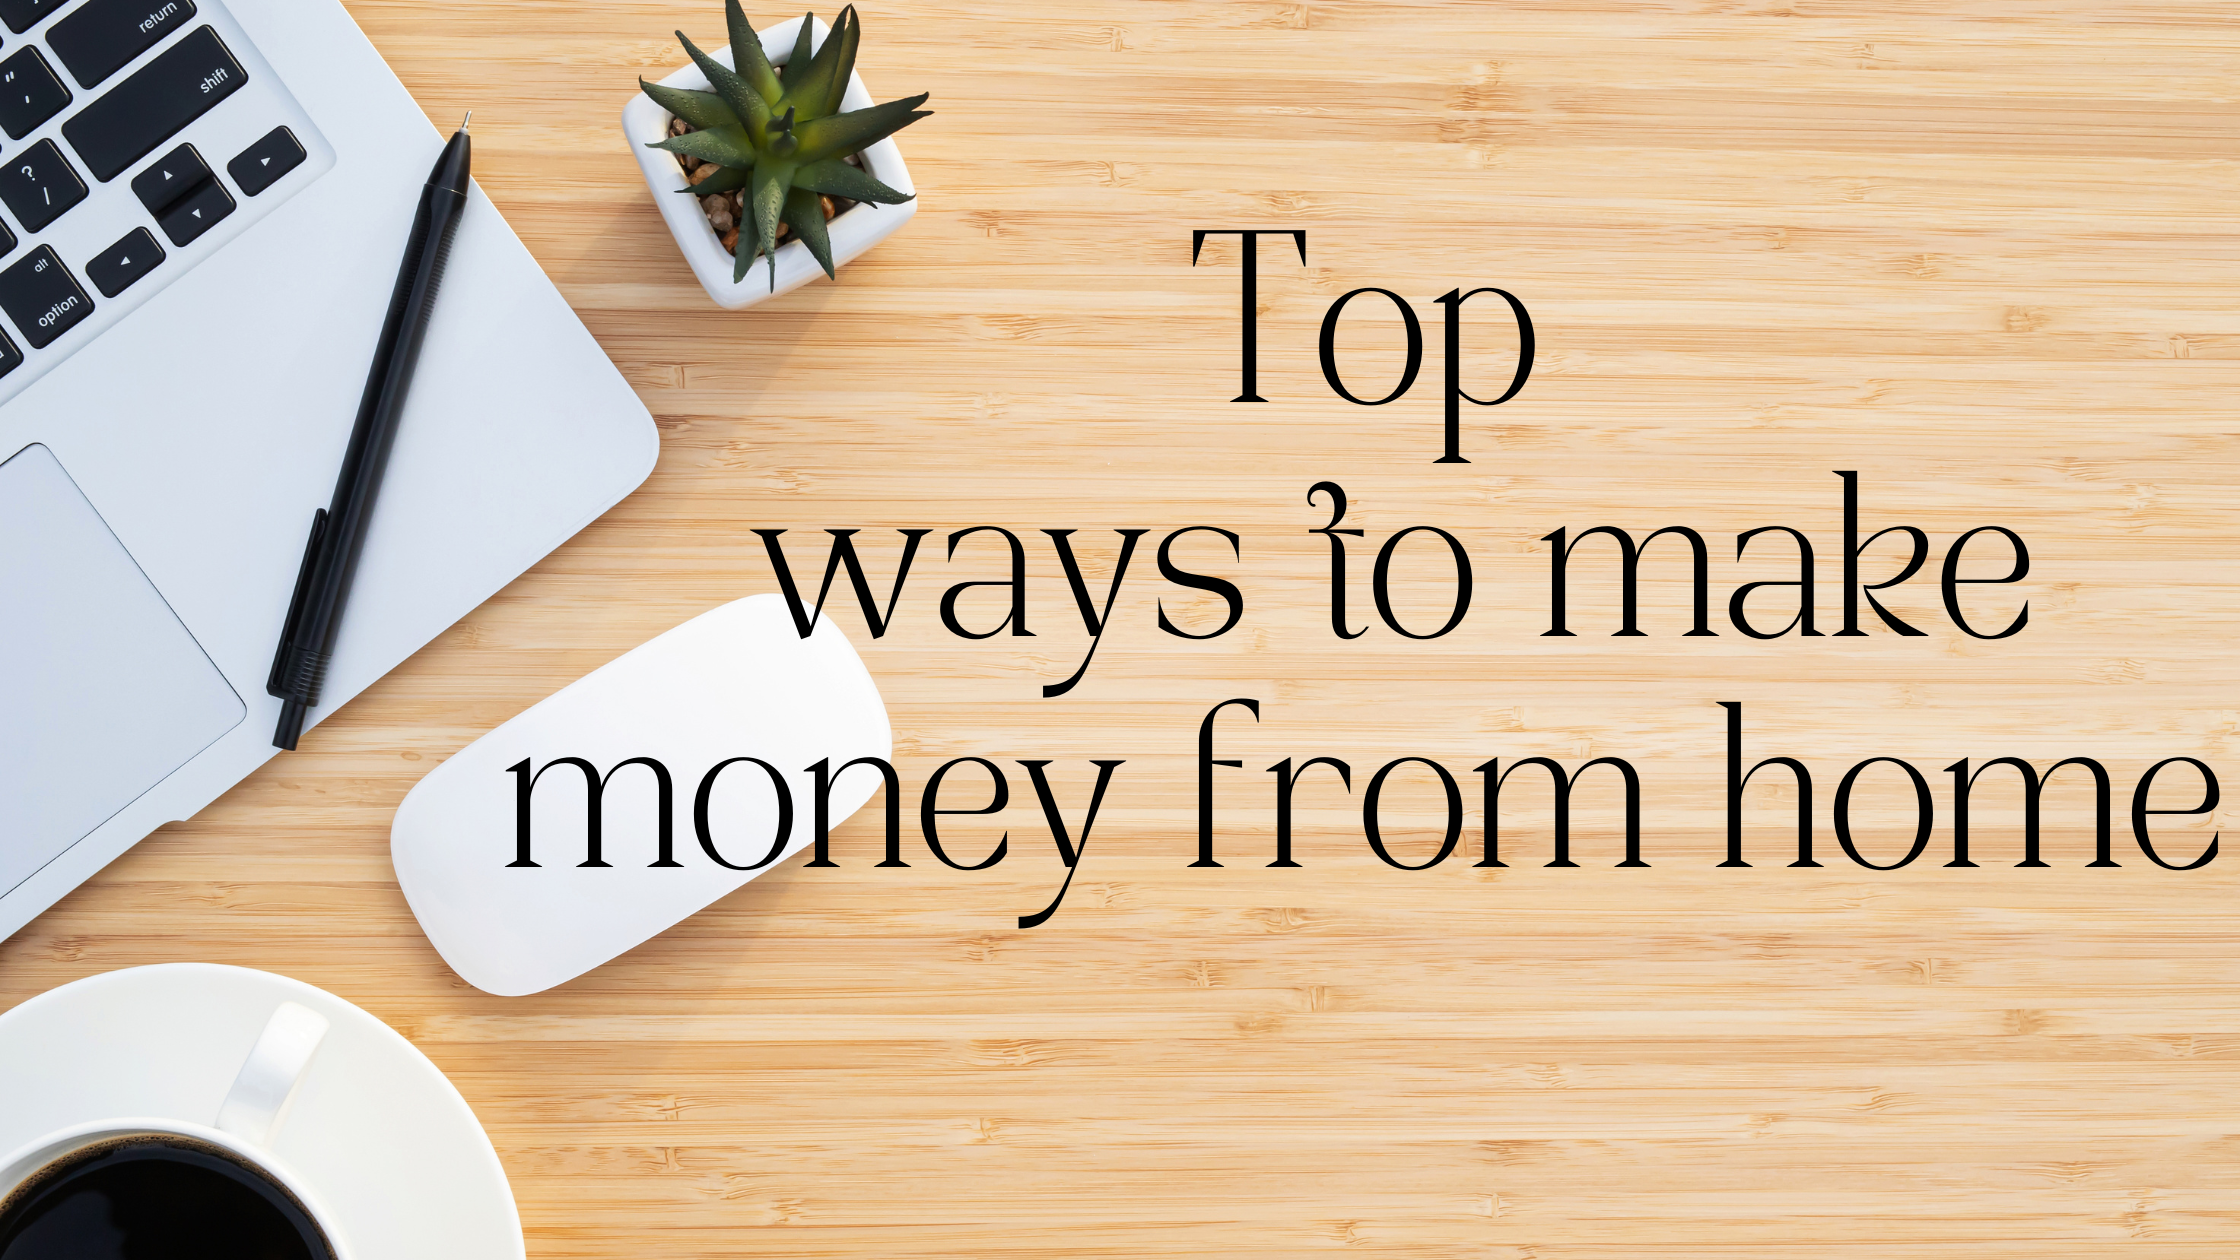 Top ways to make money from home